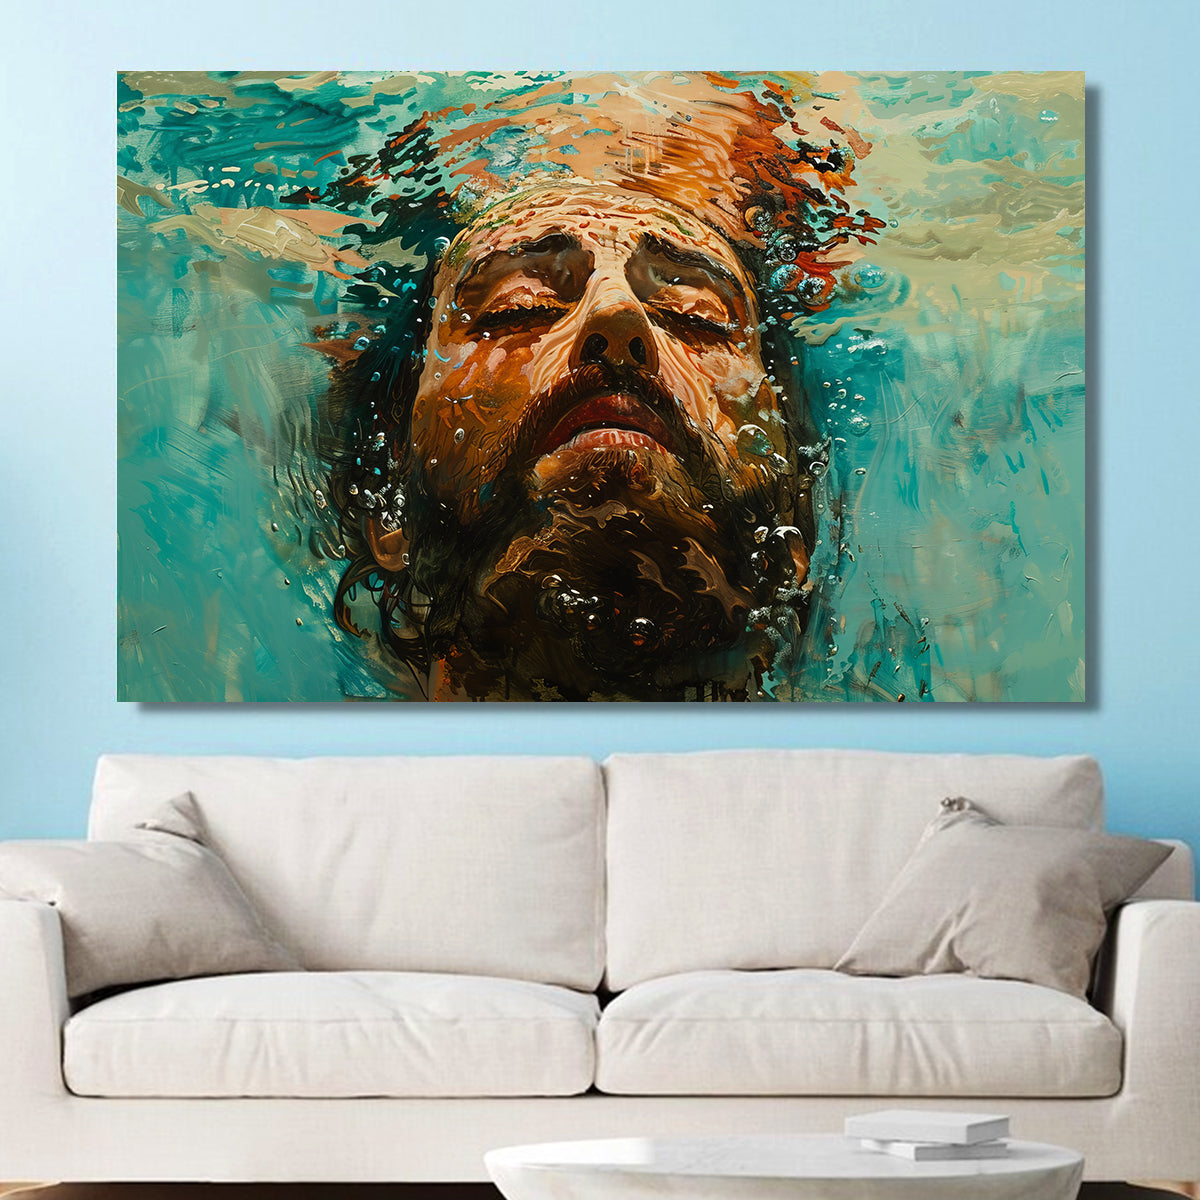 Teesdily | Jesus Portrait Watercolor Art Print, Jesus Christ Wall Art, Christian Home Decor, Jesus God Believer Gifts Poster No Frame/ Wrapped Canvas